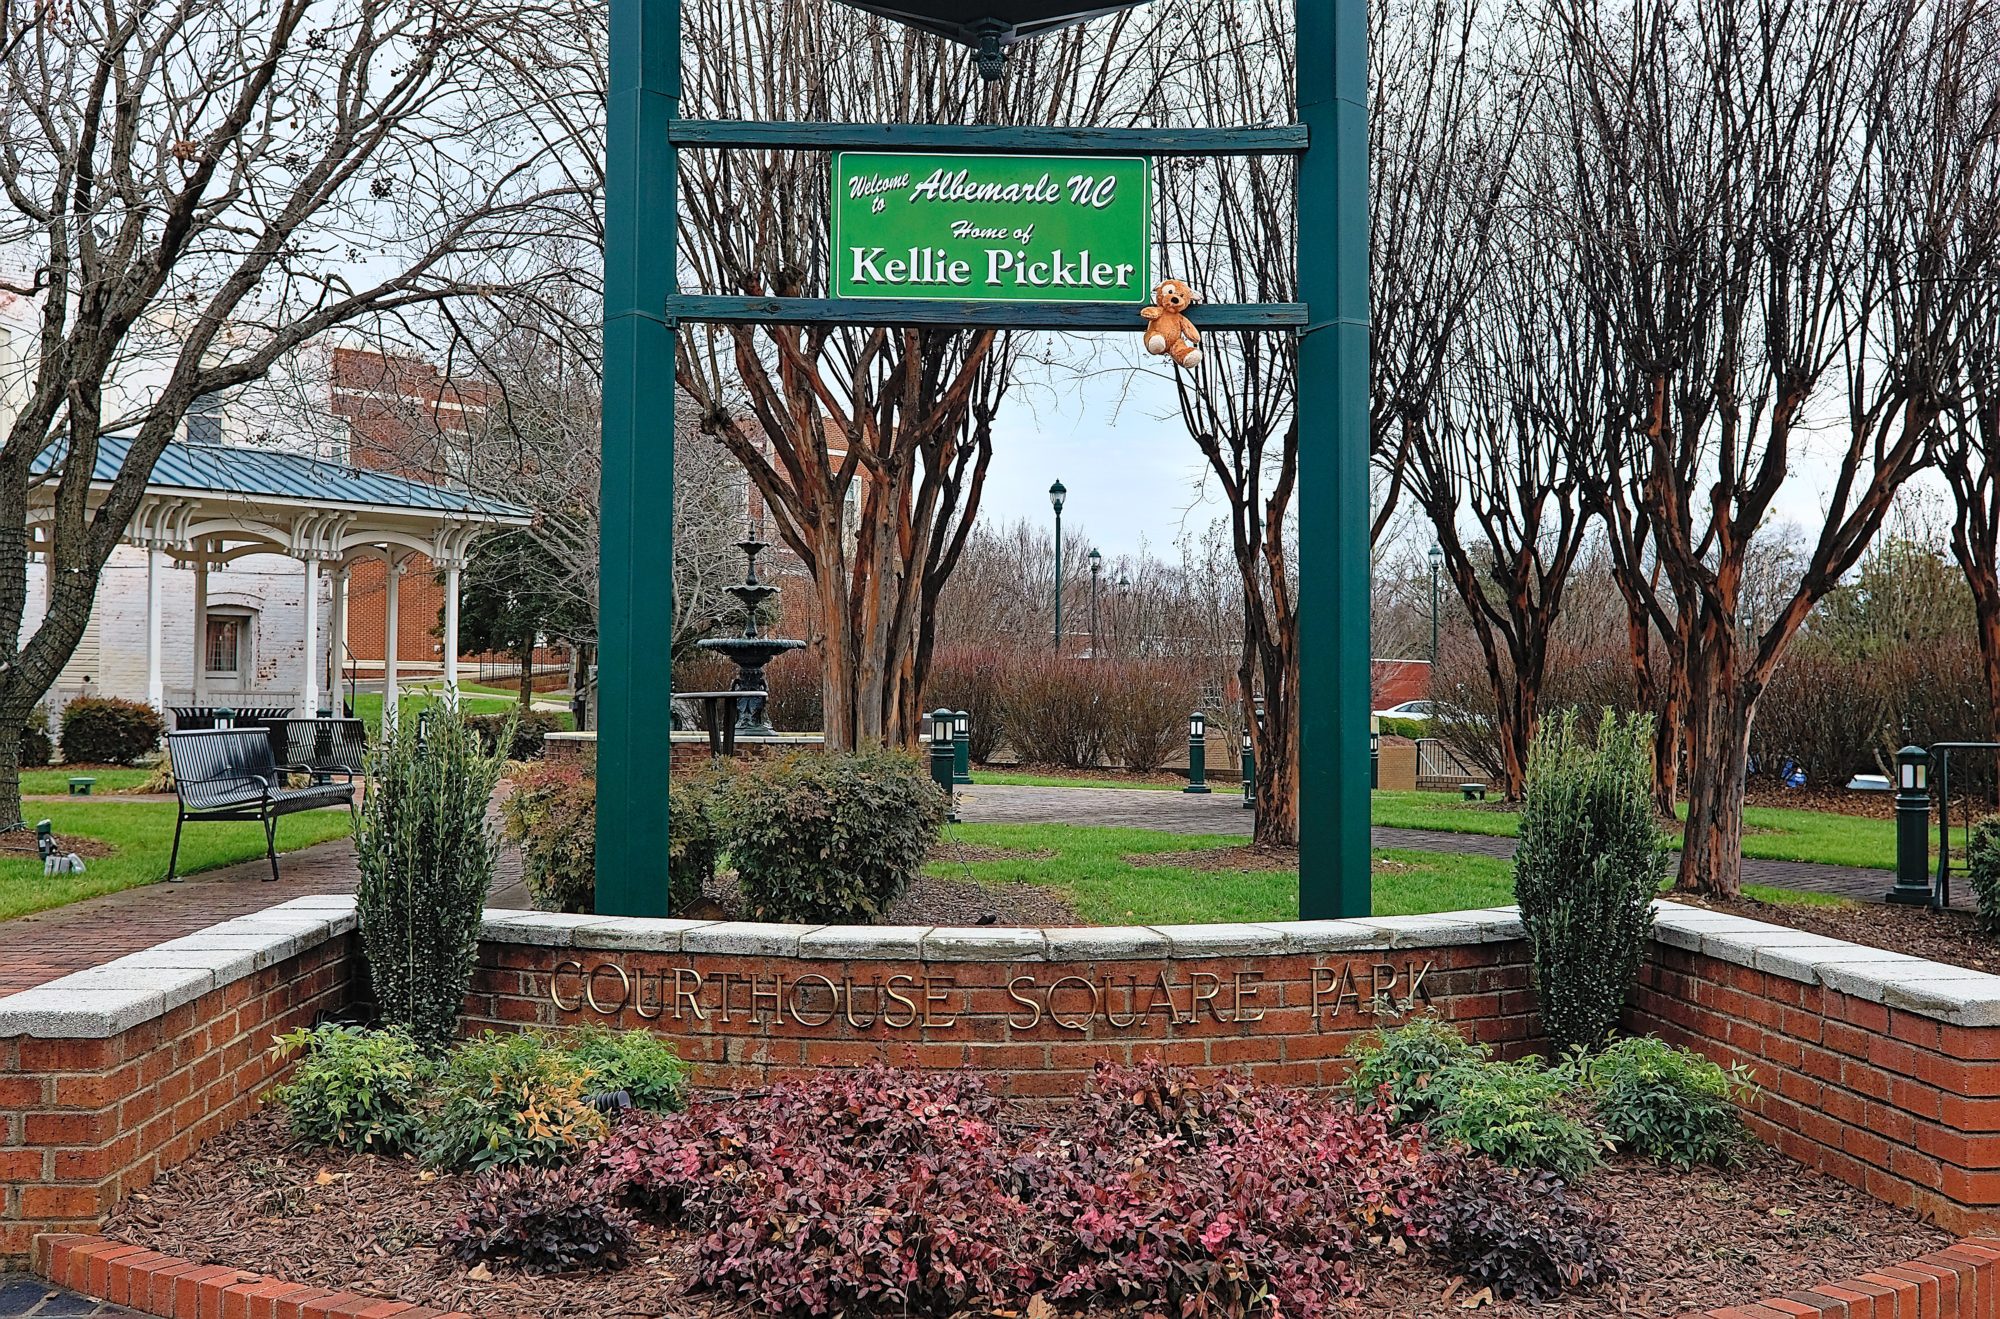 Courthouse Square Park with a sign that reads "Home of Kellie Pickler"